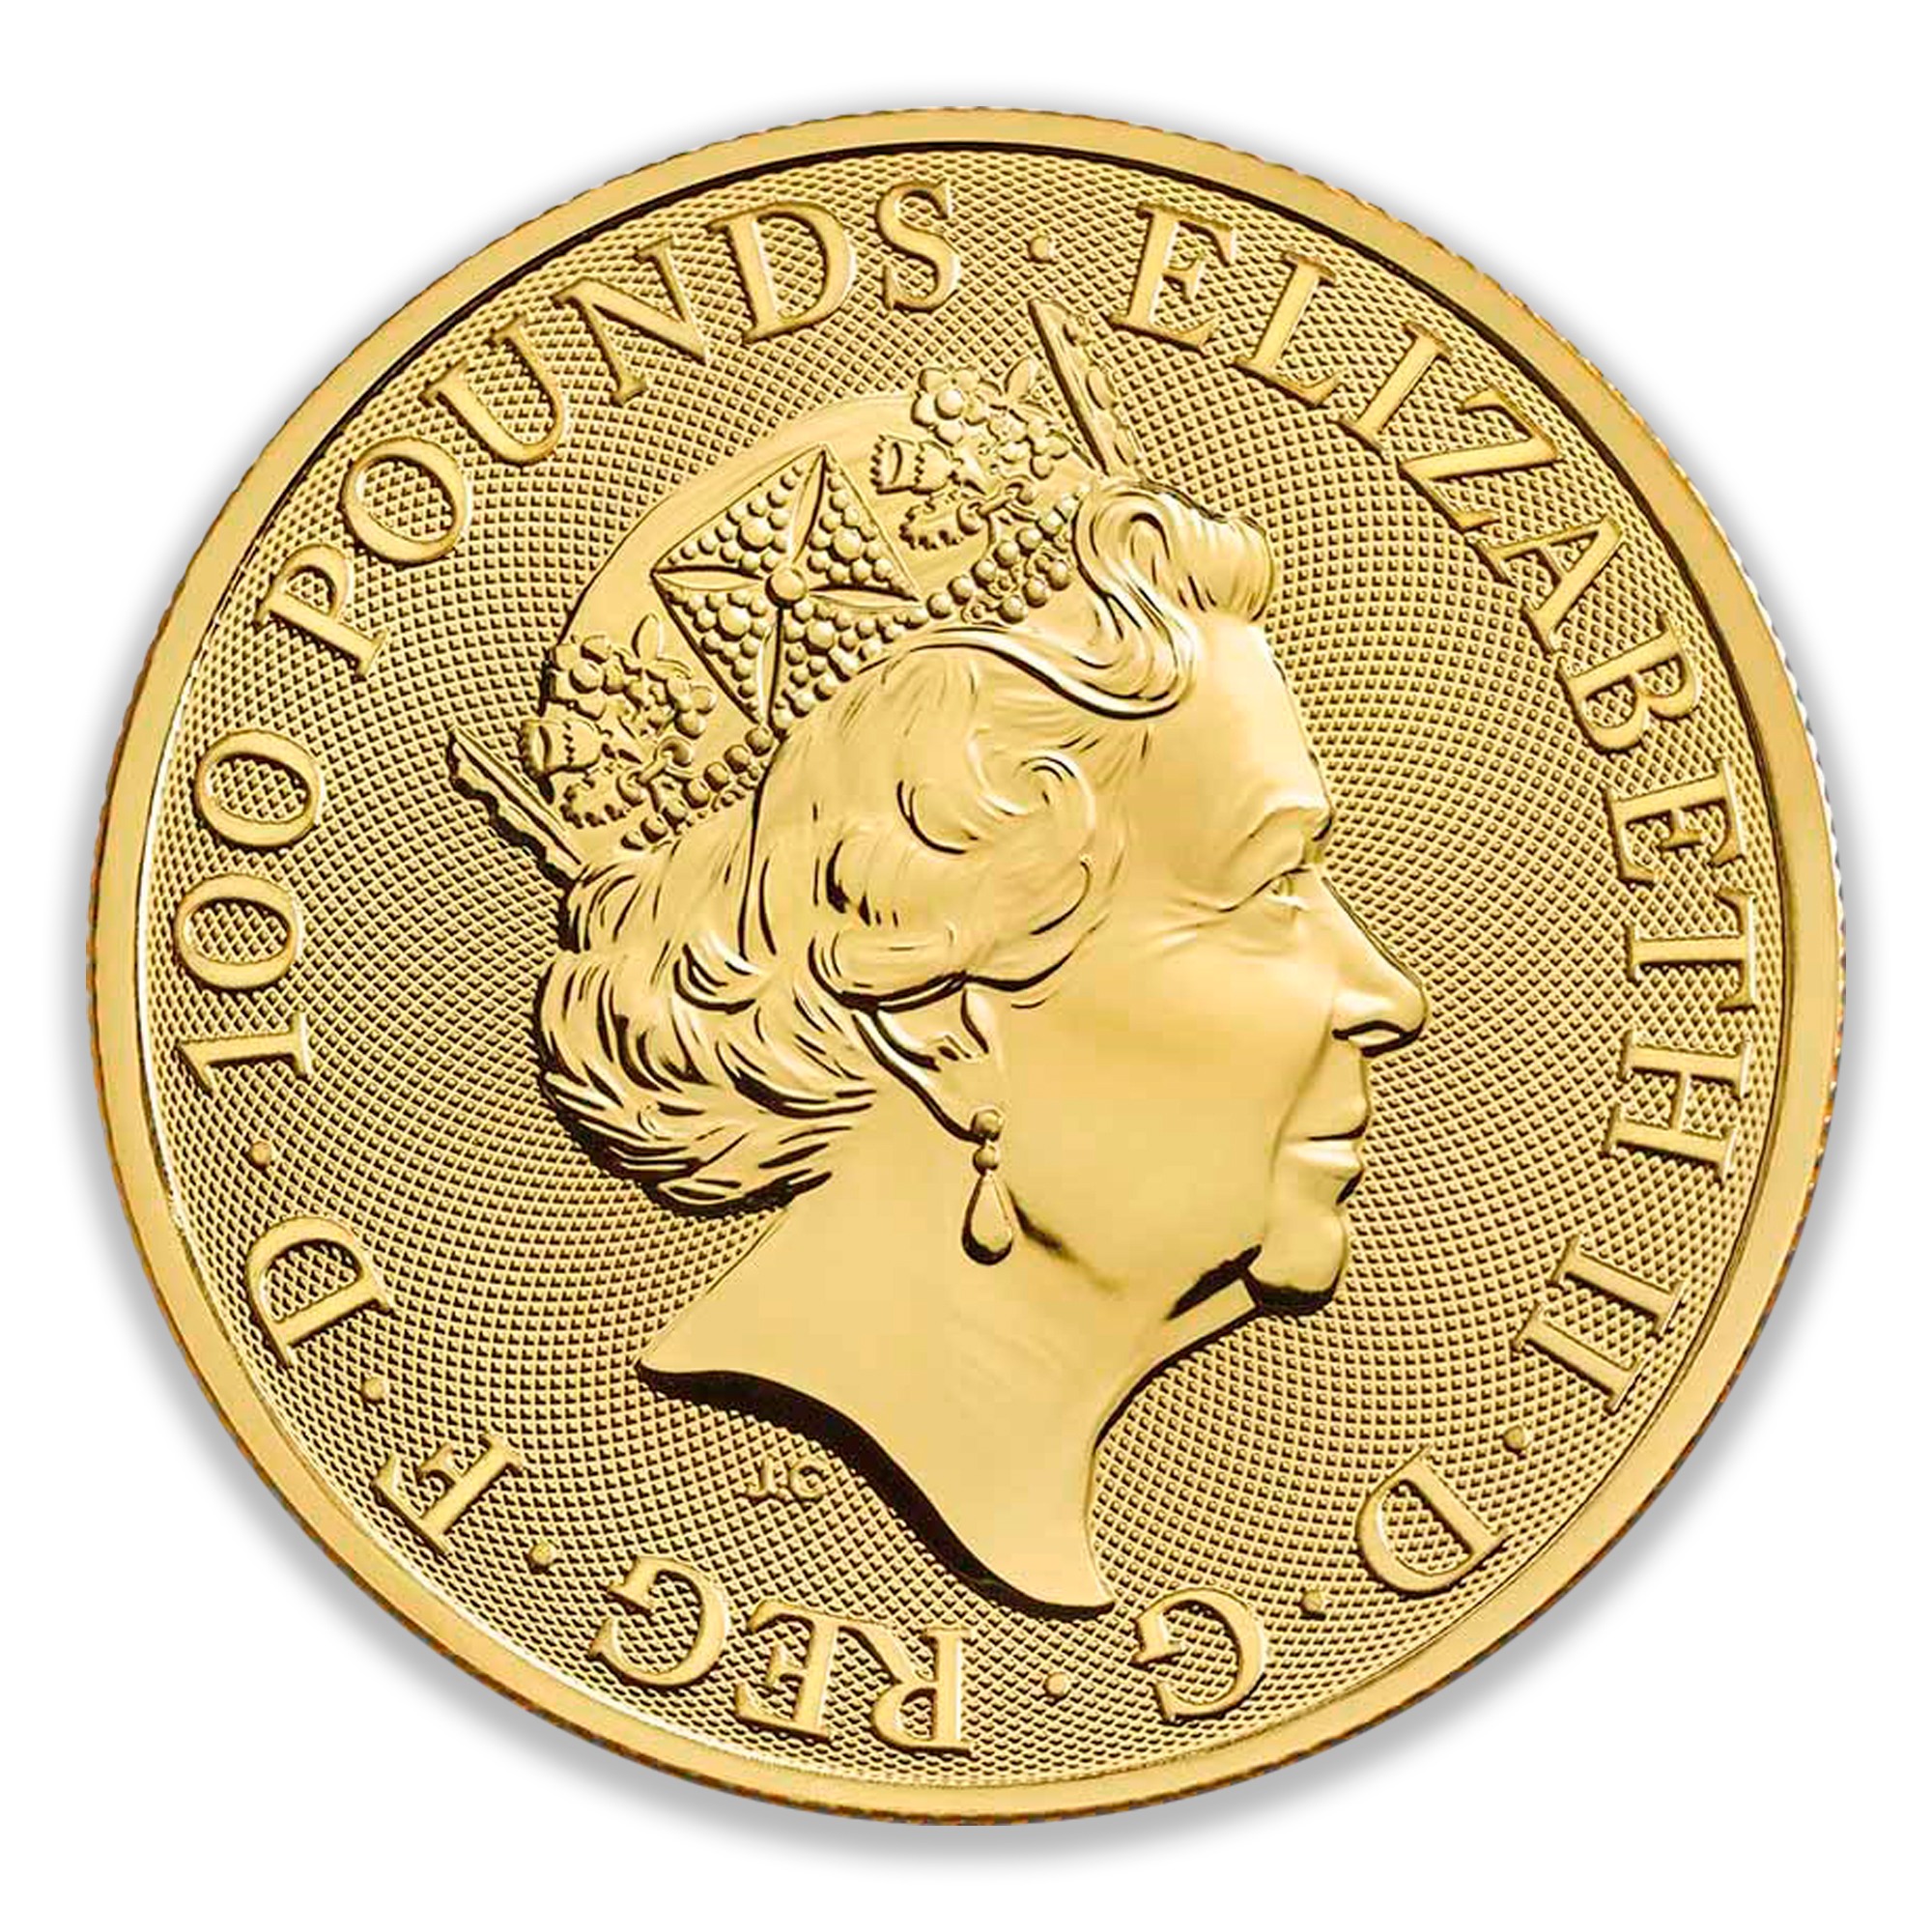 2021 1oz Great Britain Queens Beasts Completer Gold Coin